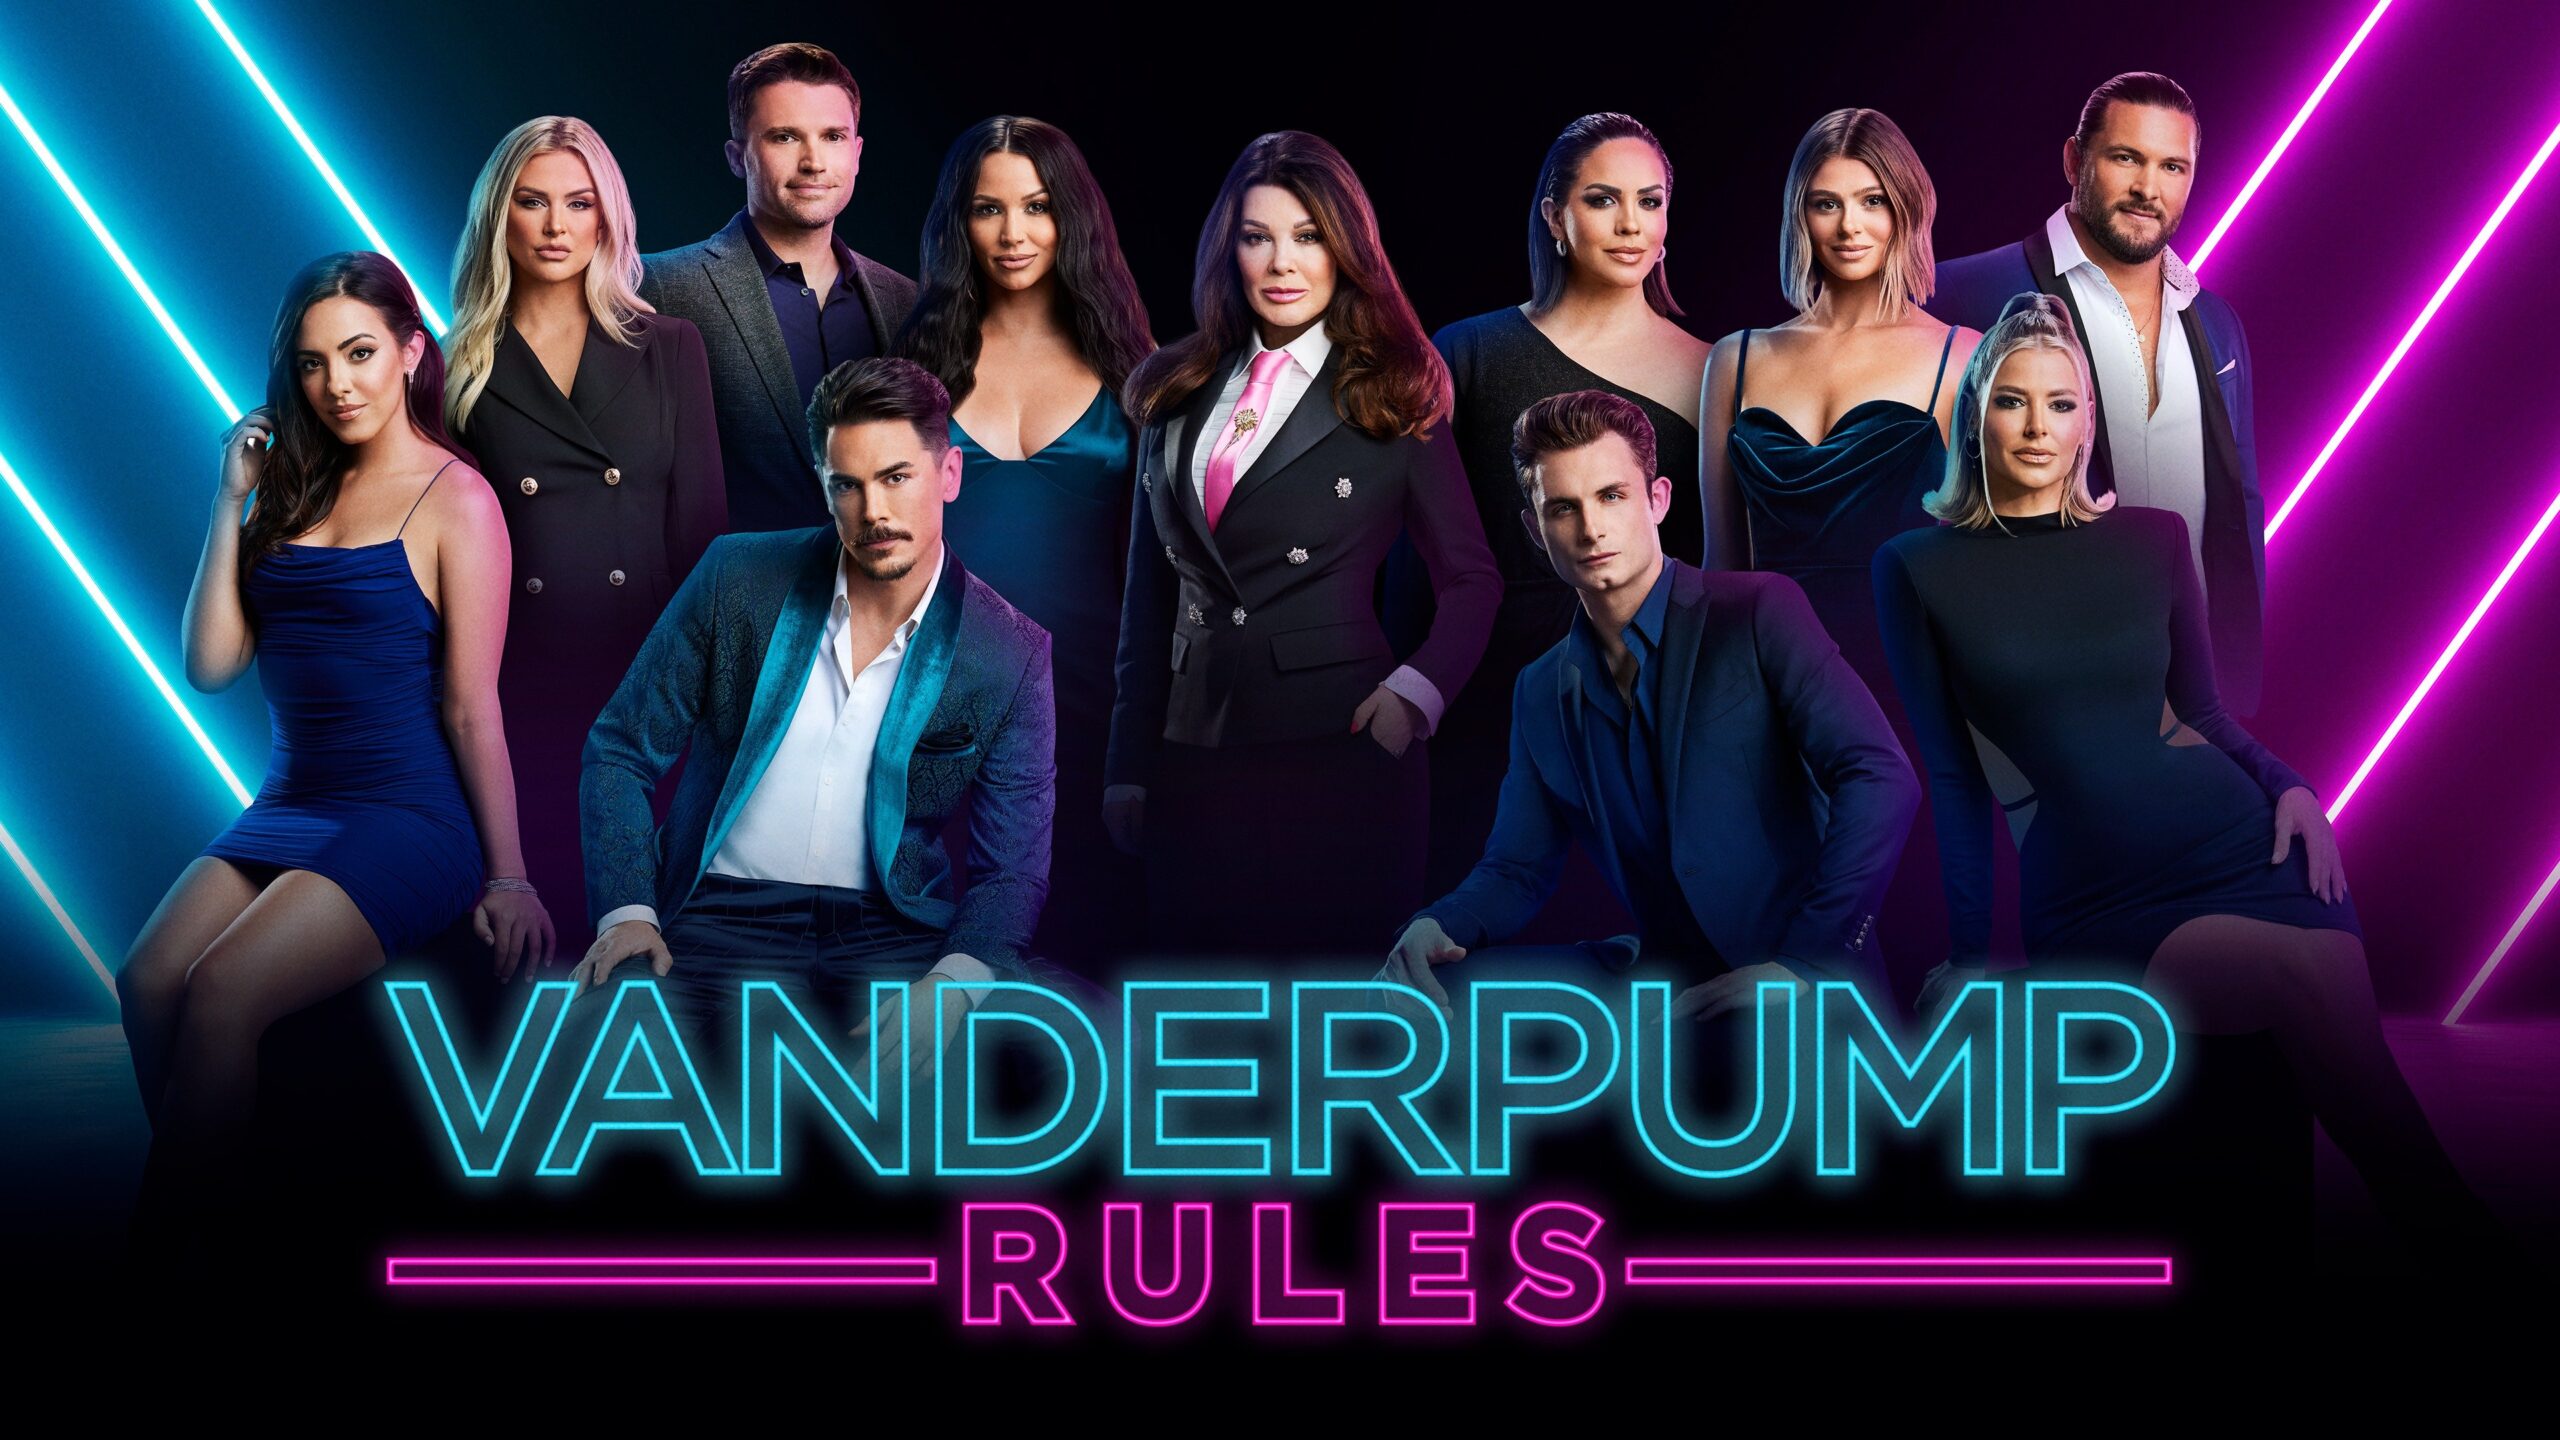 Vanderpump Rules Season 10 Finale and Reunion: All the Drama You Need to Know